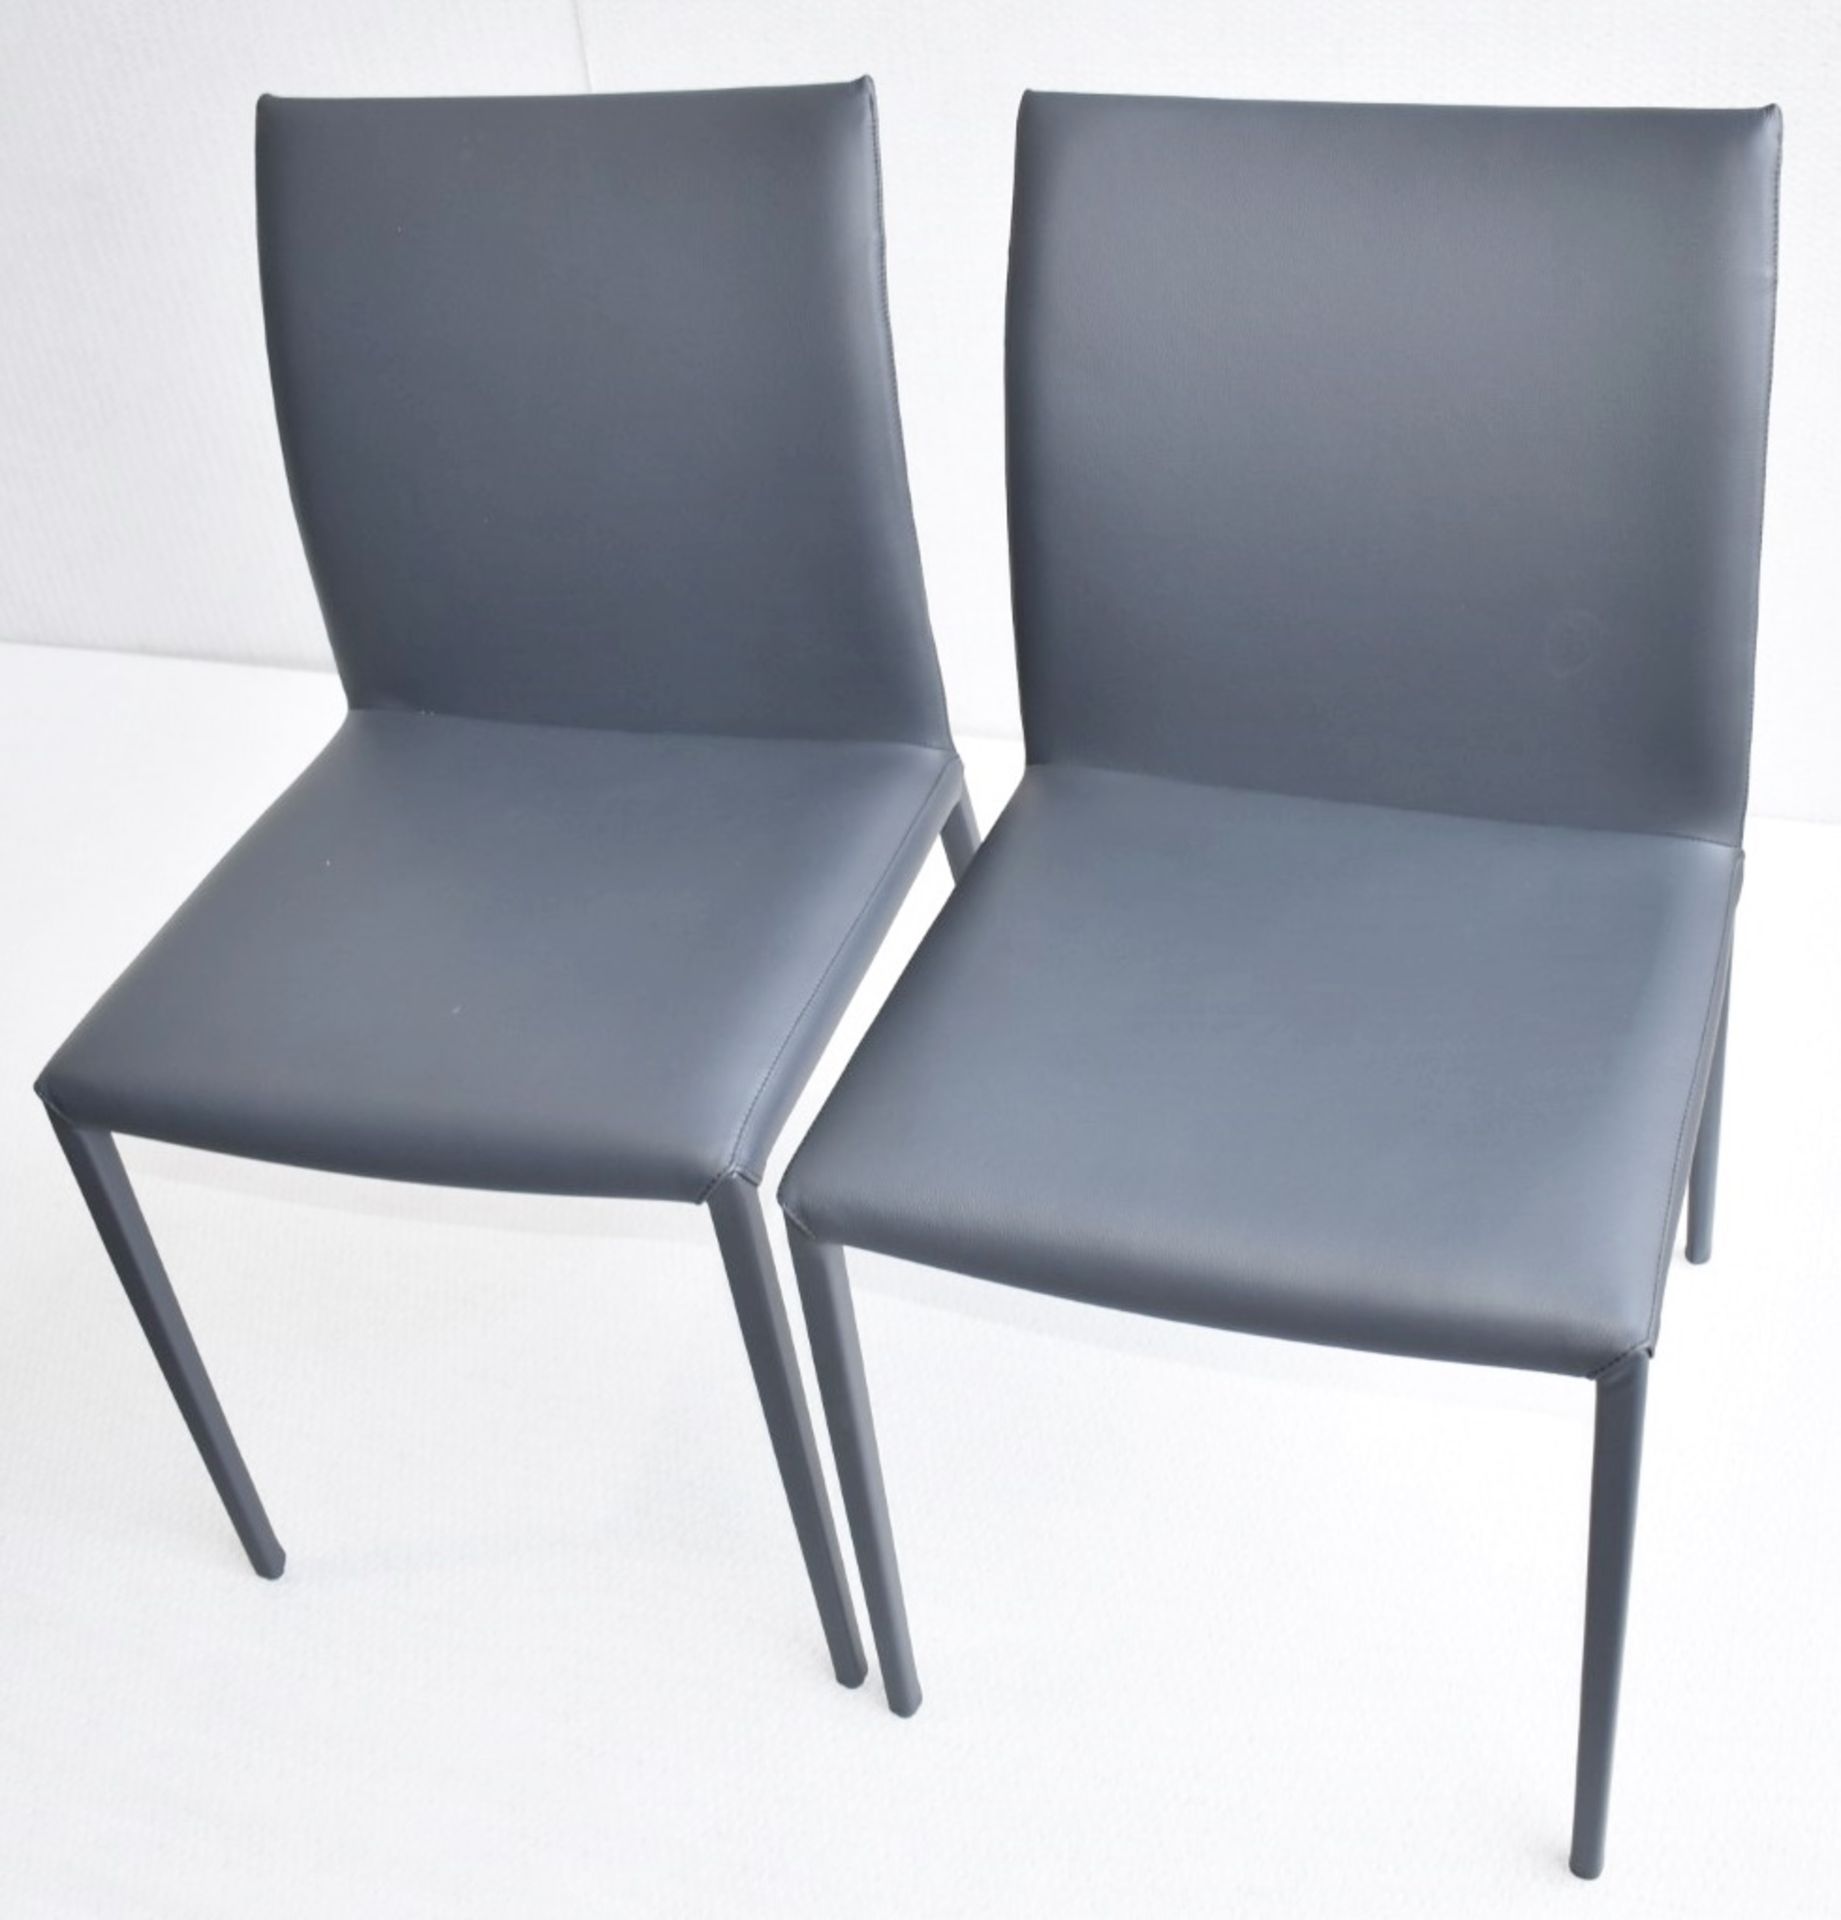 Pair of CATTELAN ITALIA Norma Designer Leather Upholstered Dining Chairs - Original Price £1,258 - Image 3 of 7